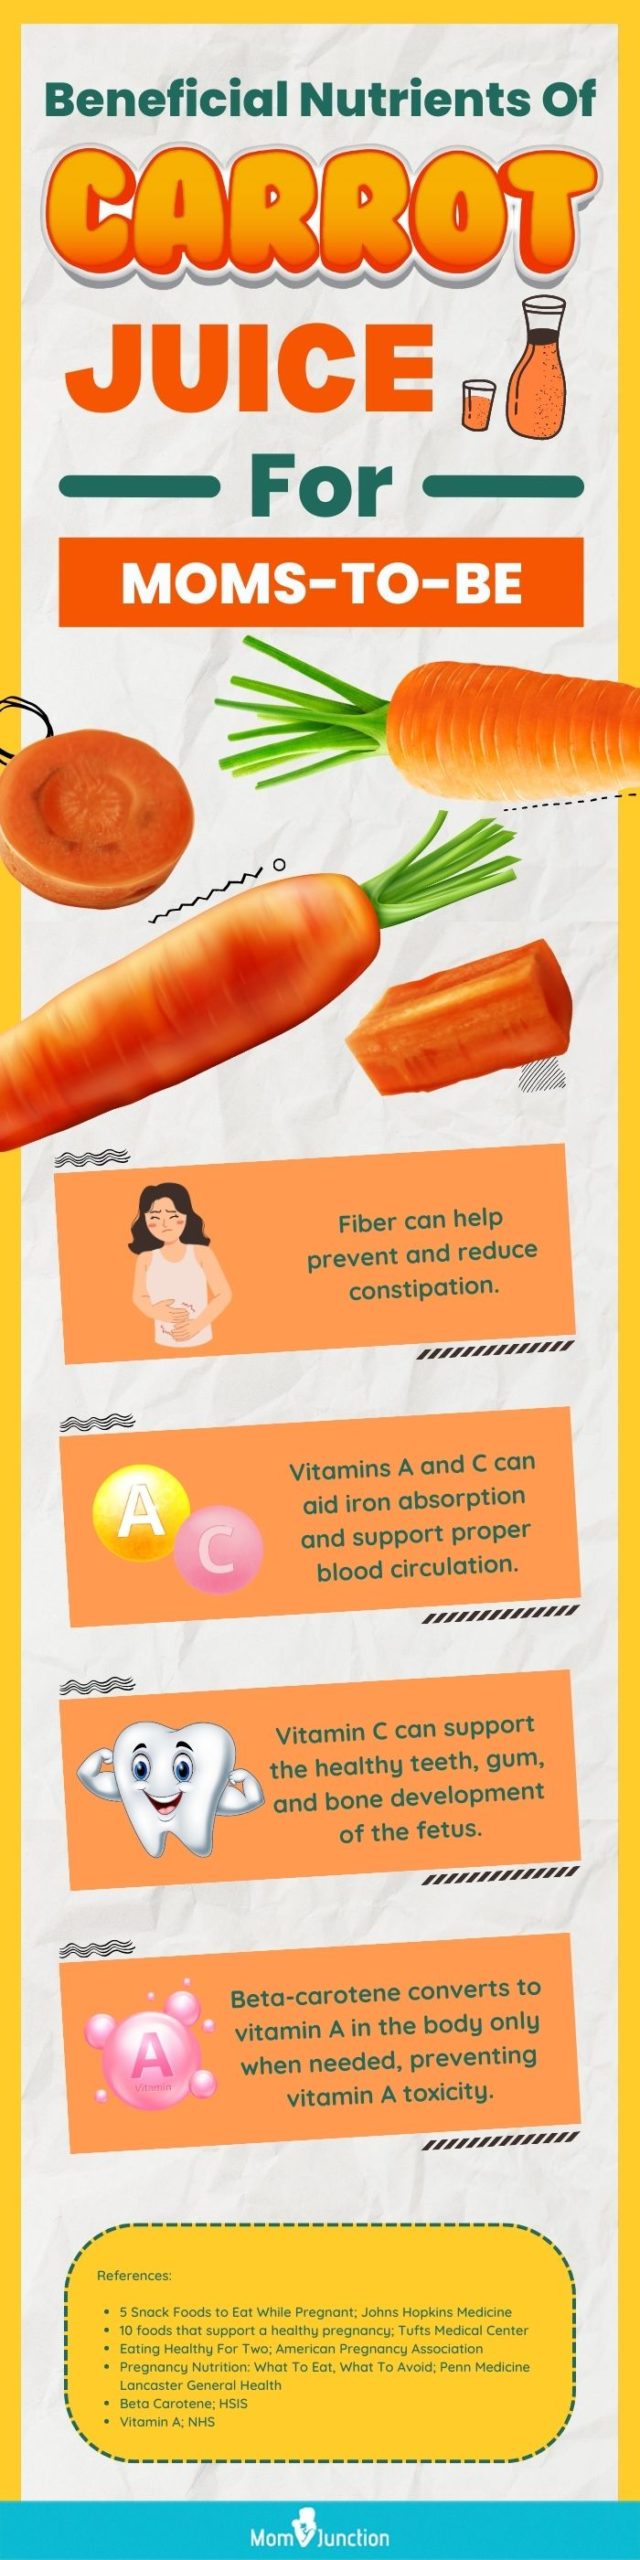 beneficial nutrients of carrot juice for moms to be (infographic)